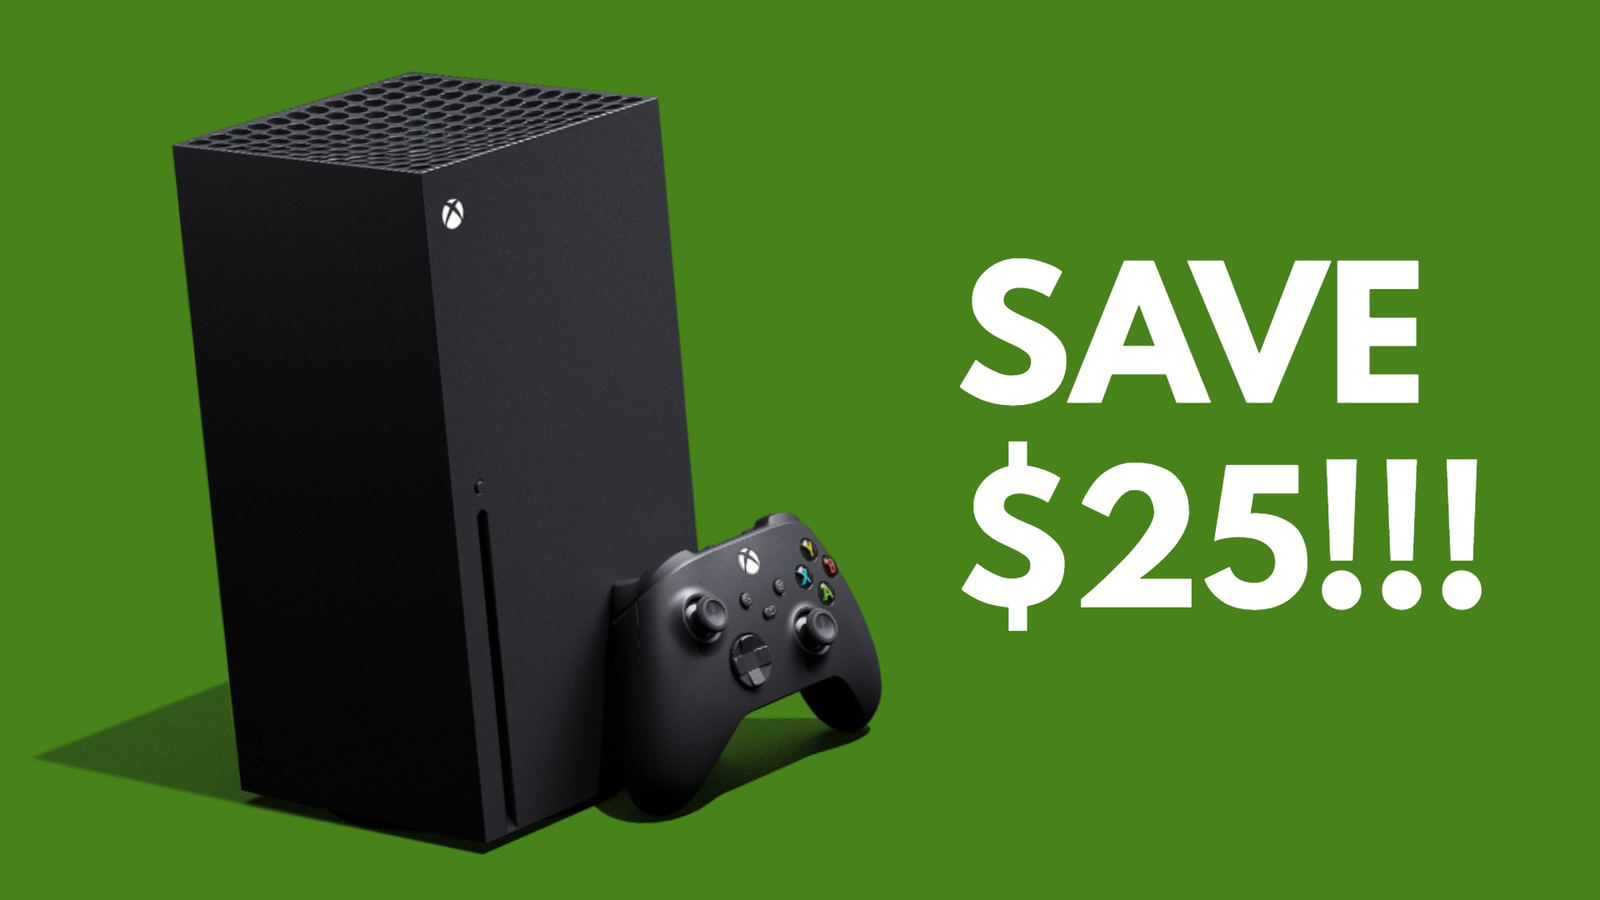 New  Black Friday Deal: Save $50 Off the Xbox Series X and Get $50 in   Credit